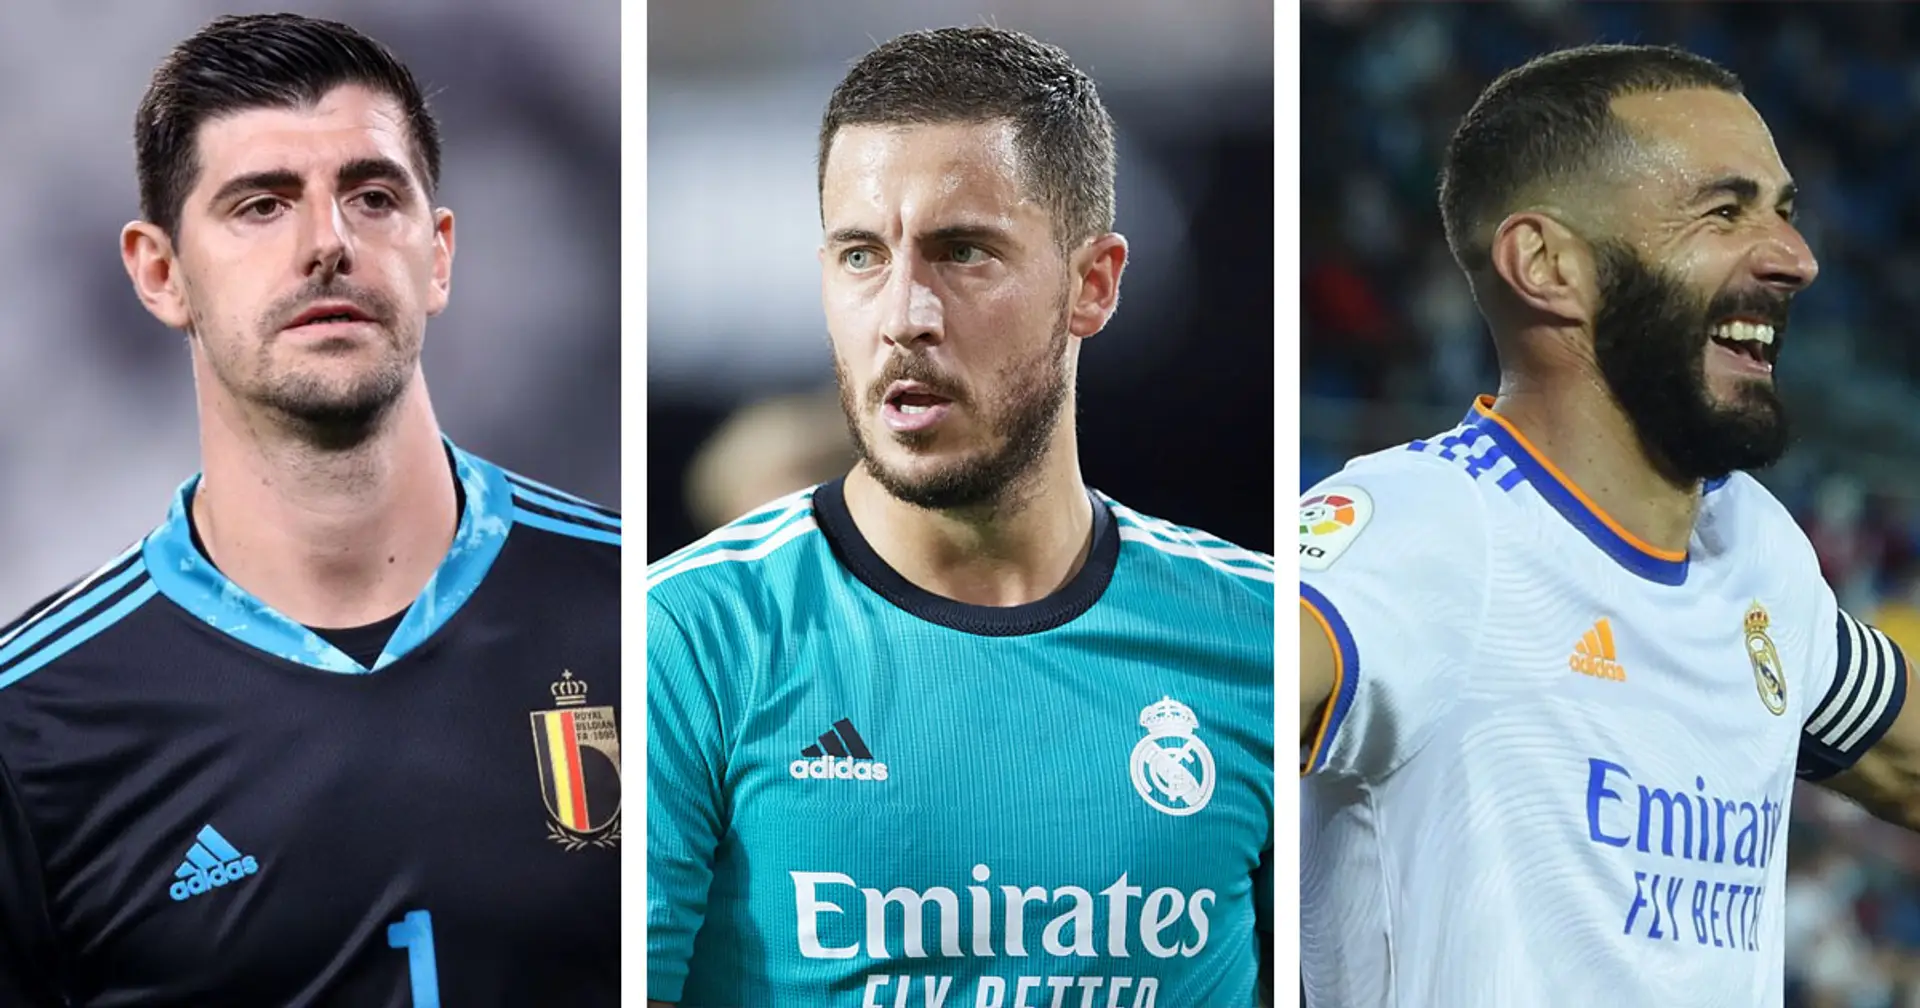 6 Madrid players with least game time revealed and 2 more big stories you might've missed